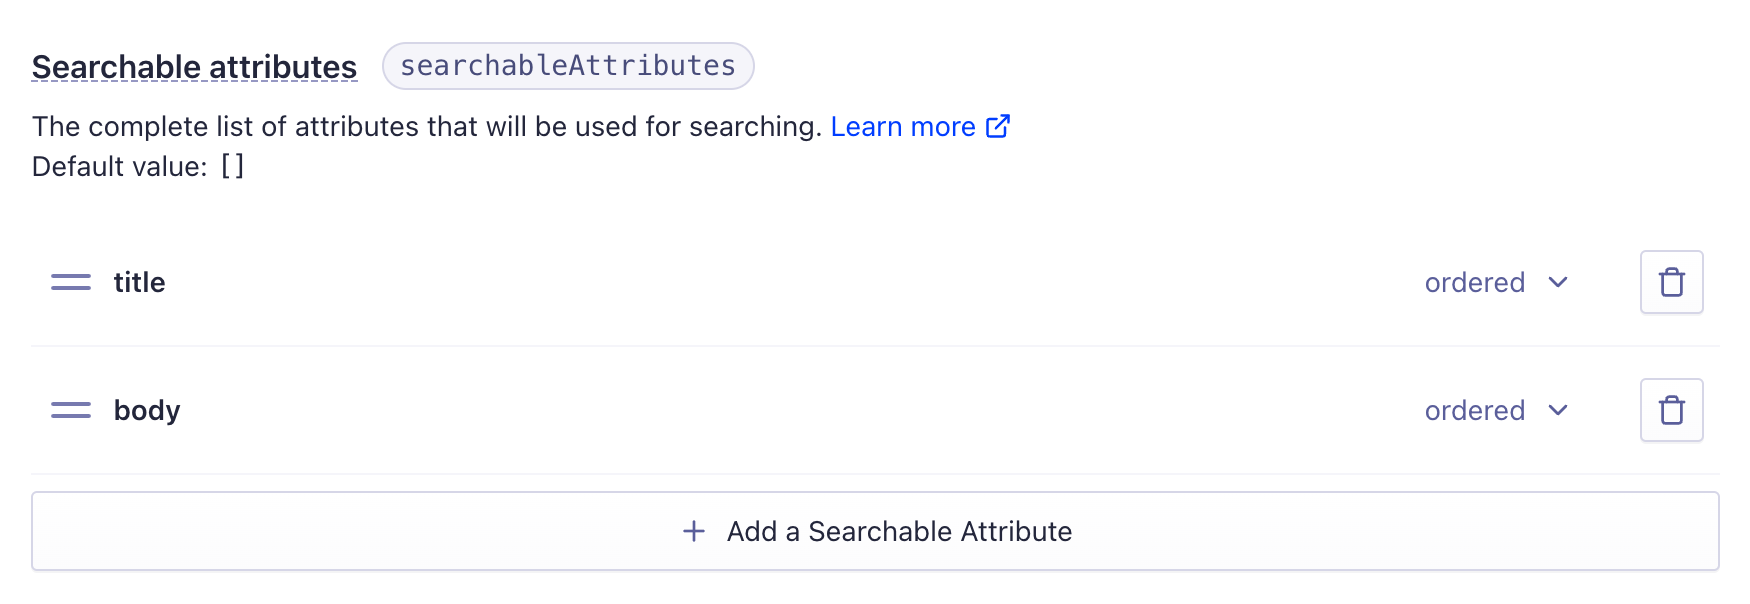 Algolia index configuration. The Searchable attributes section has title and body added as attributes. They are both set to ordered.